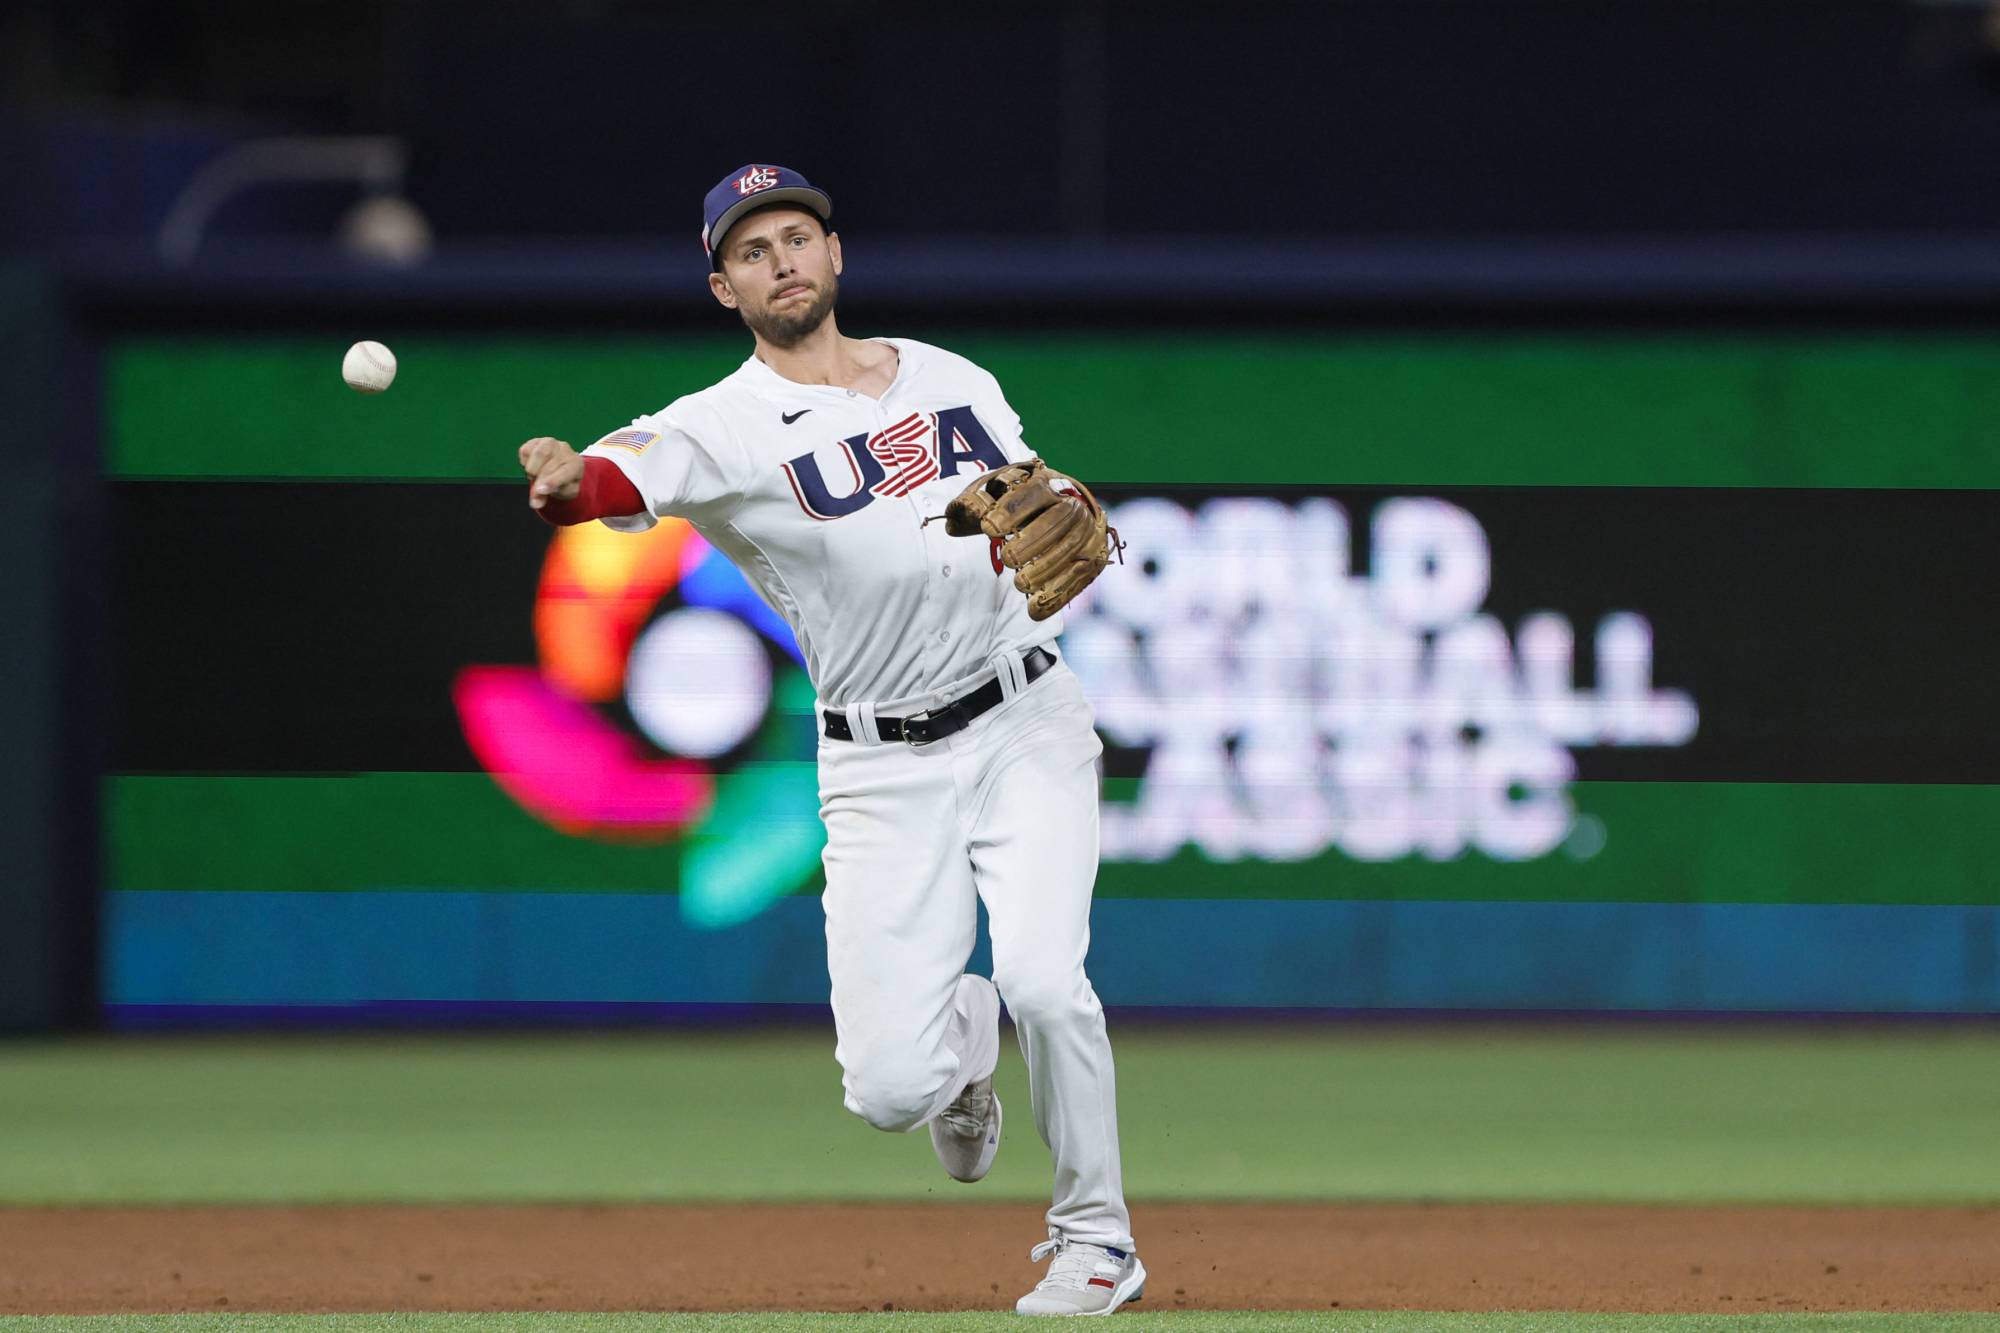 U.S. shortstop Trea Turner throws to first for an out against Cuba during the first inning at LoanDepot Park in Miami. The U.S. won the World Baseball Classic semifinal 14-2. | USA TODAY / VIA REUTERS